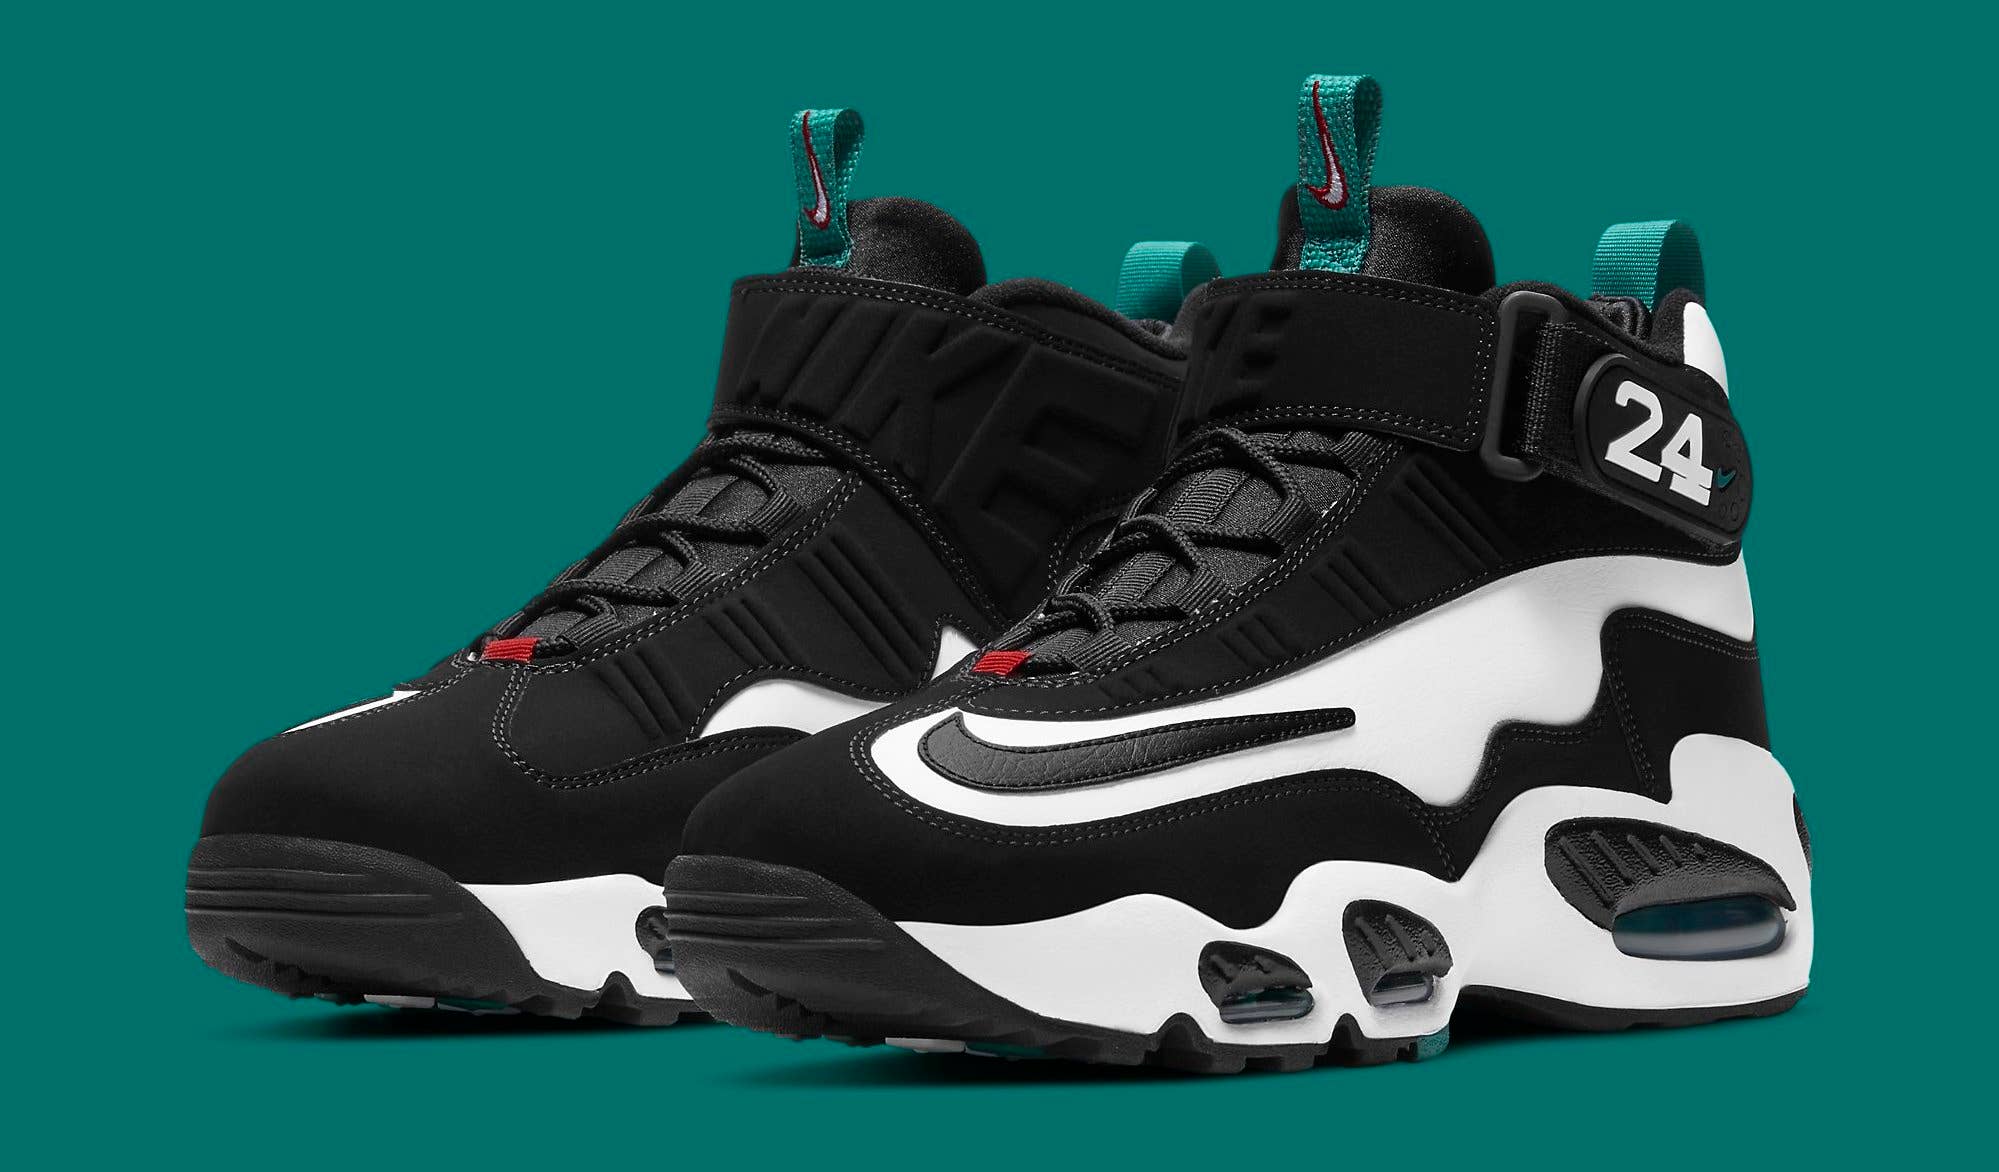 Ken Griffey Jr. Shows Off Upcoming Colorways of the Nike Air Griffey Max II